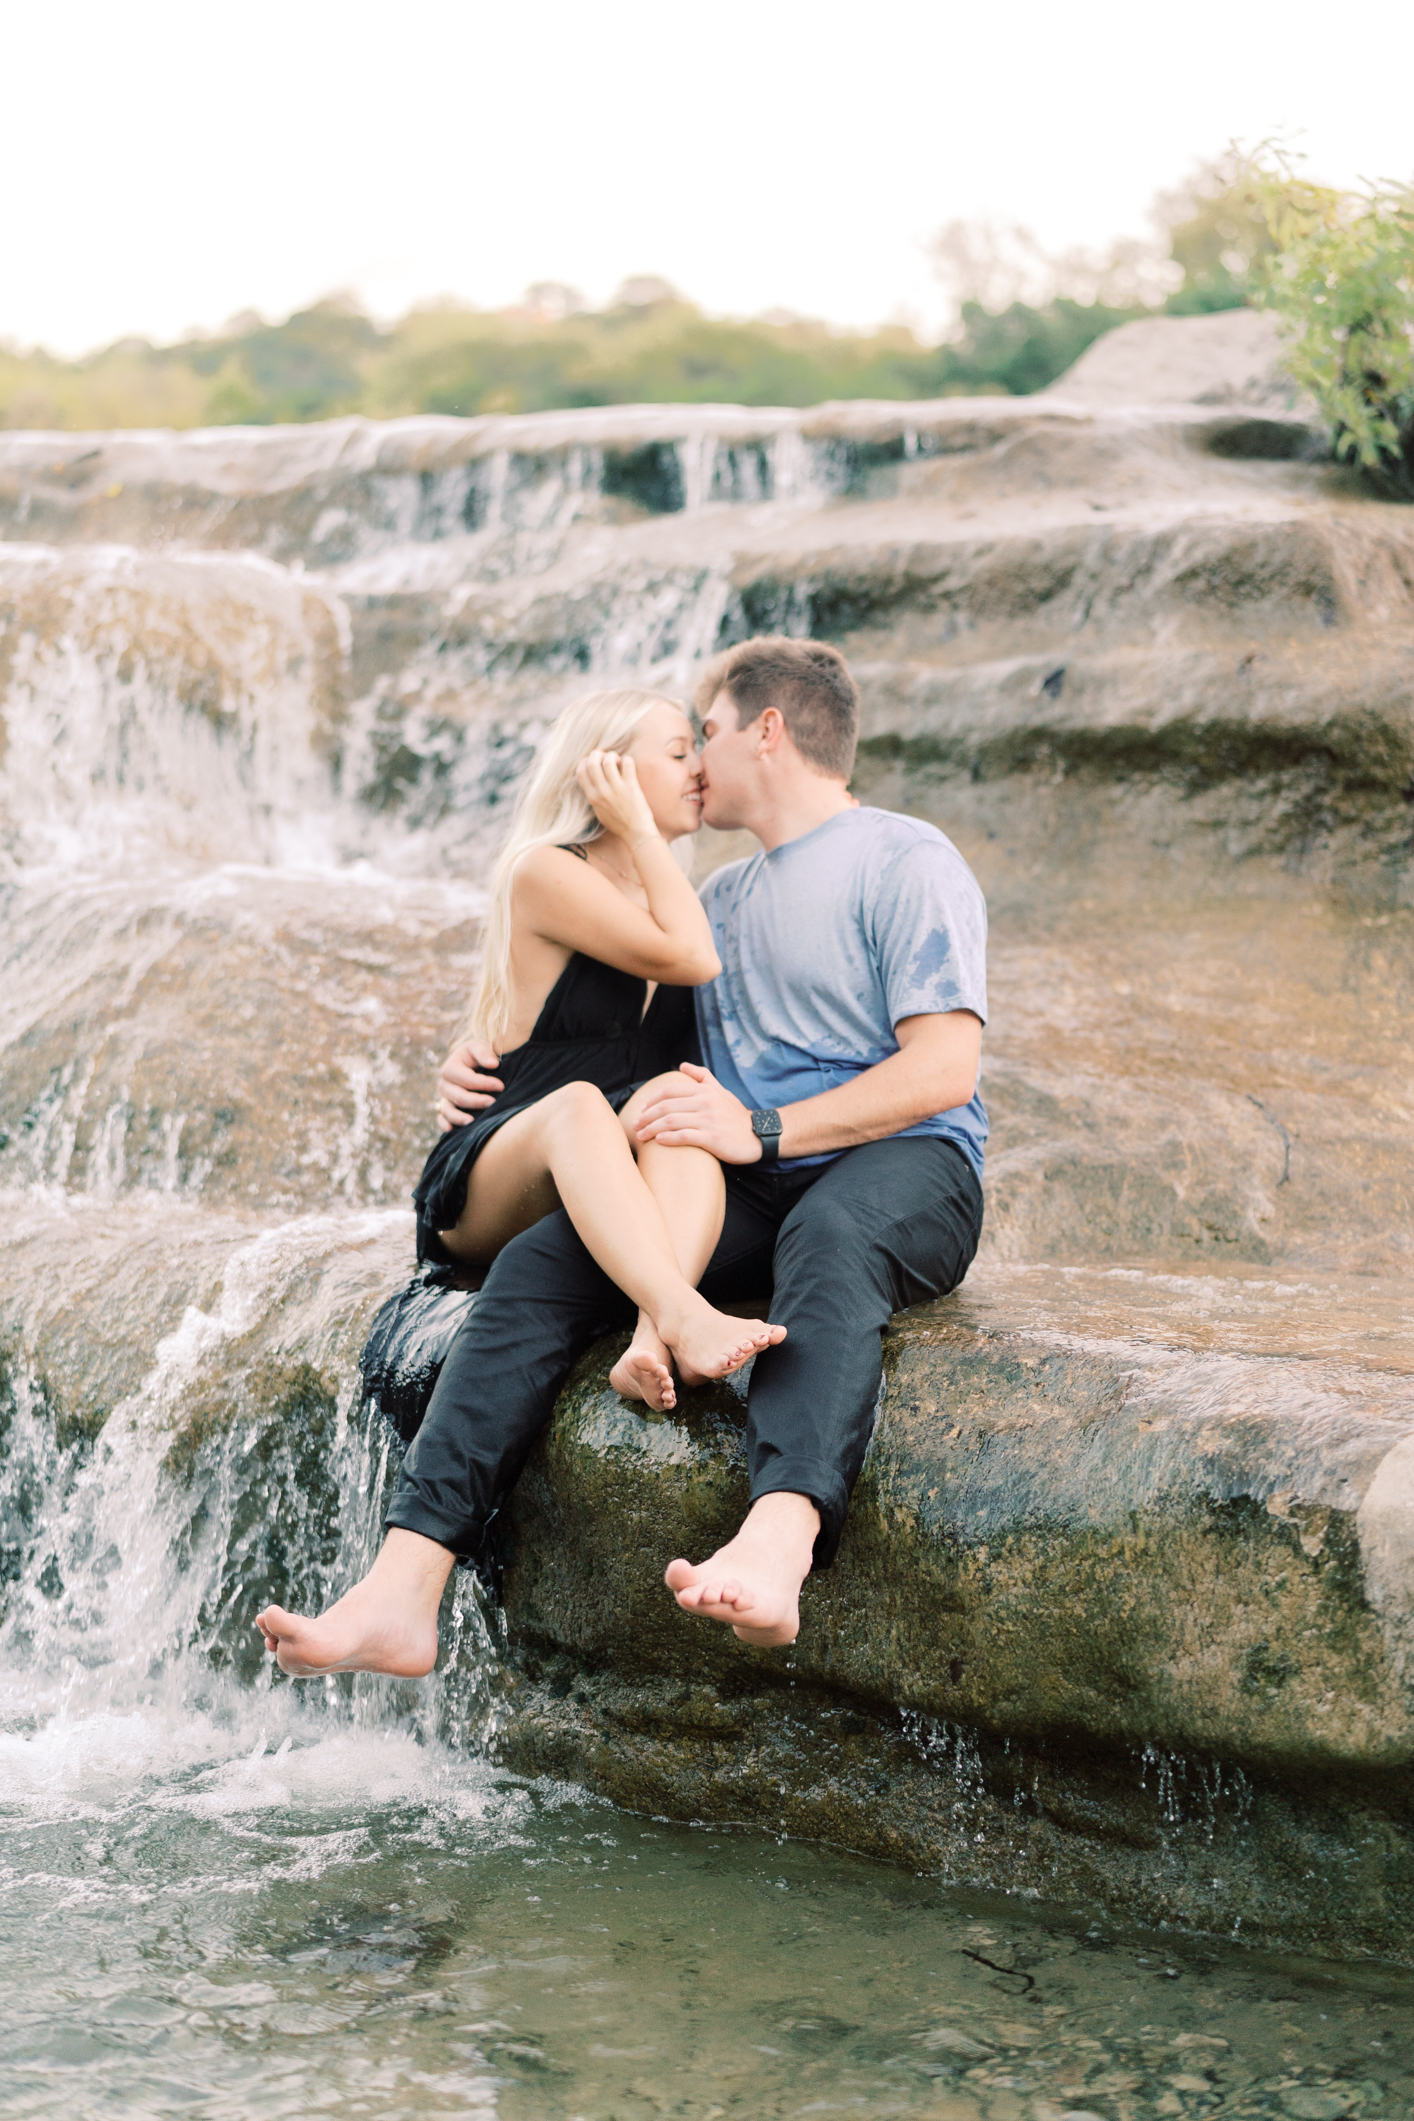 Pro tip for the very coolest (literally) Austin, Texas engagement session: get in the water!! You have to see how dreamy this session is!